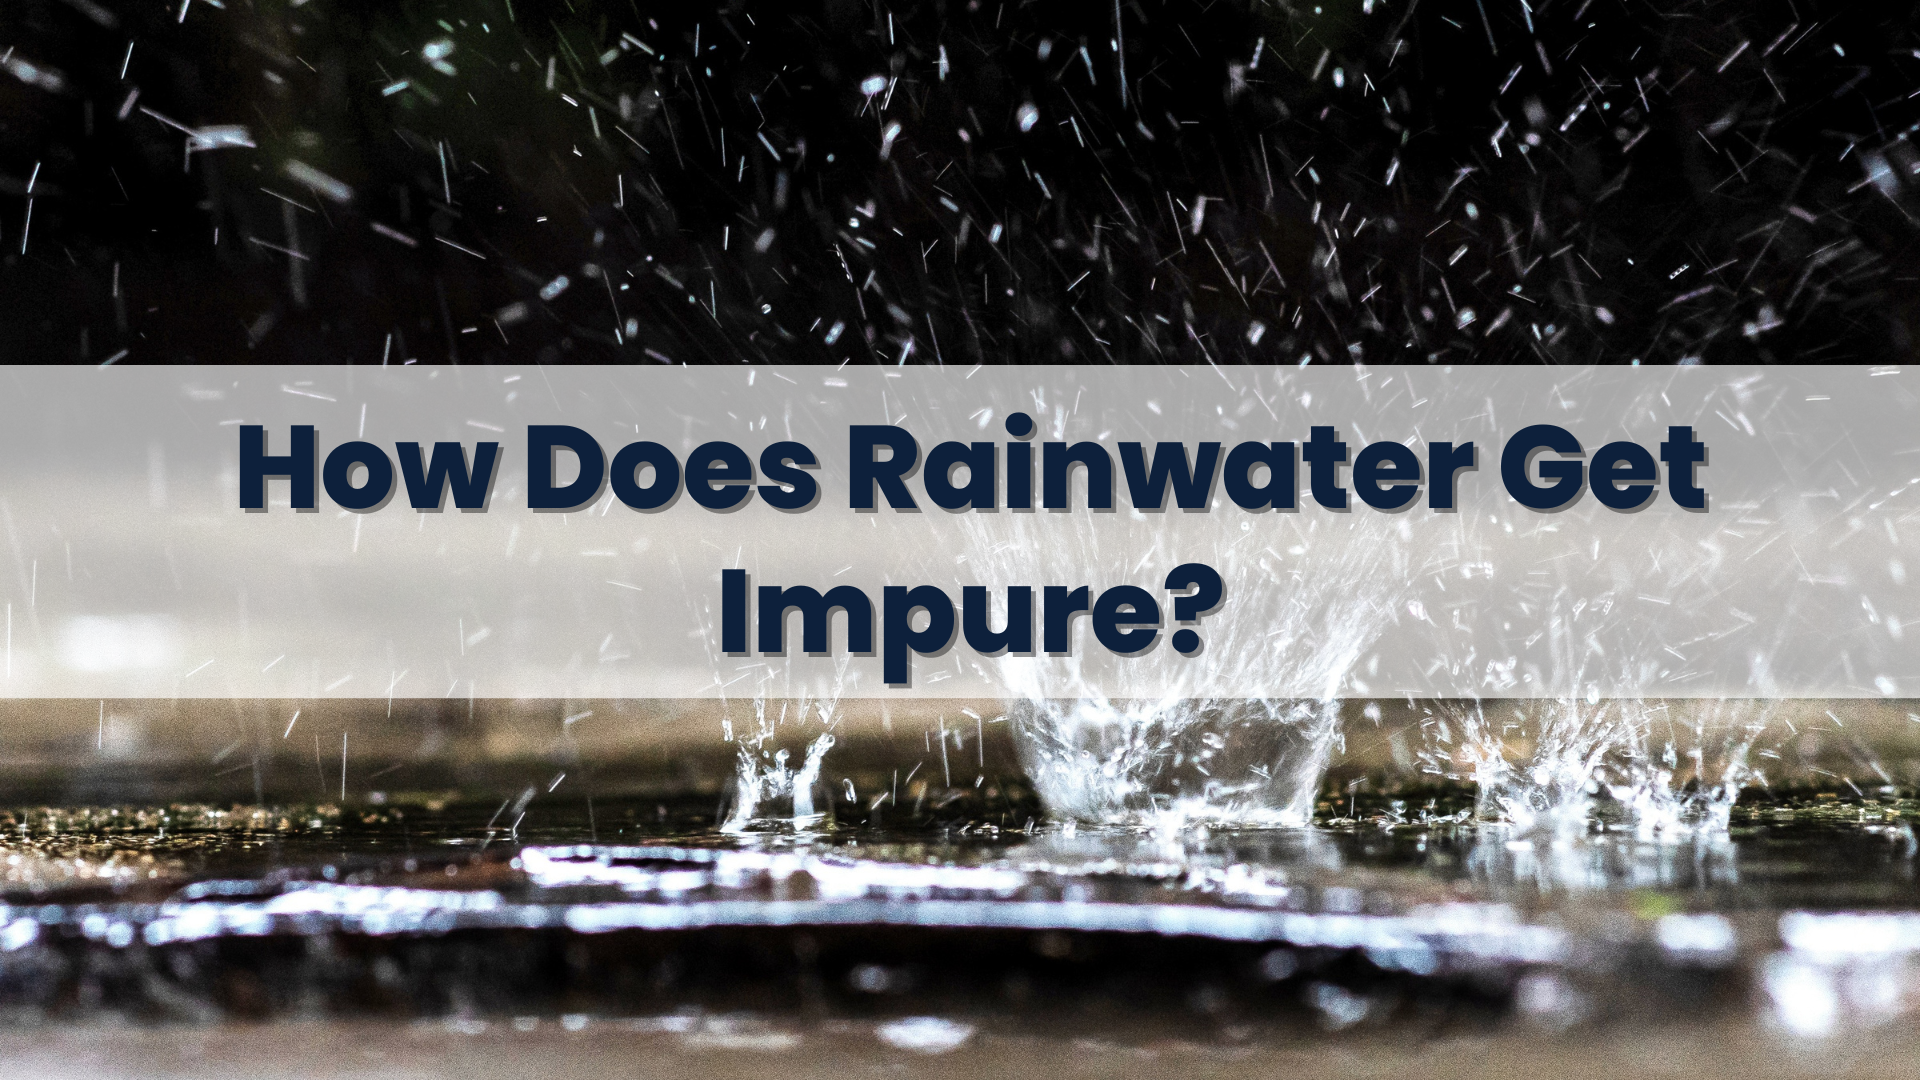 How Does Rainwater Get Impure